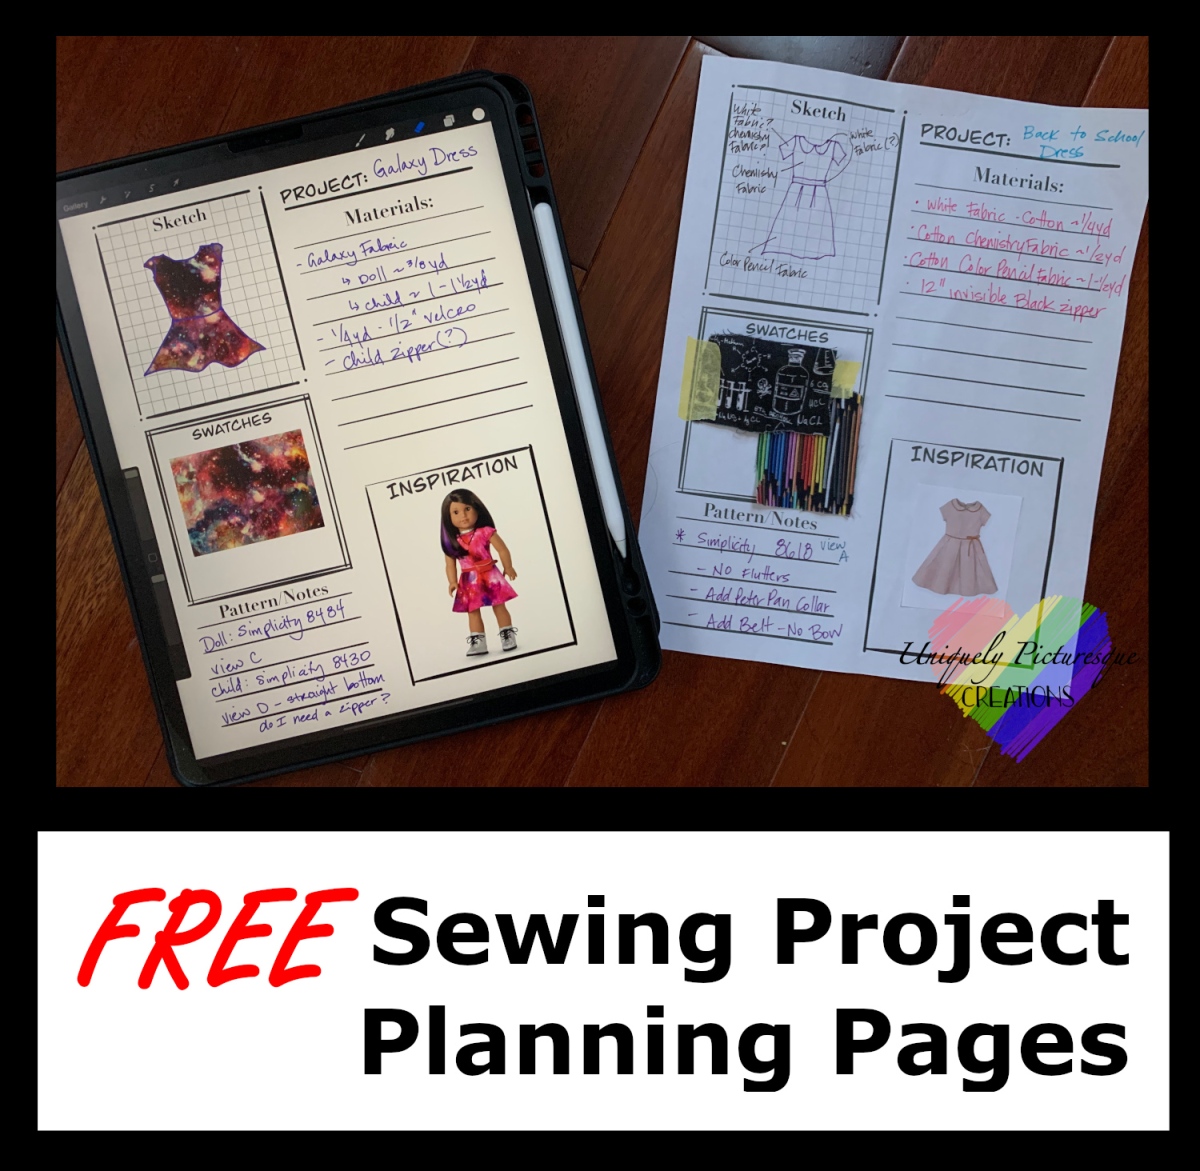 FREE Sewing Project Planner Sheet